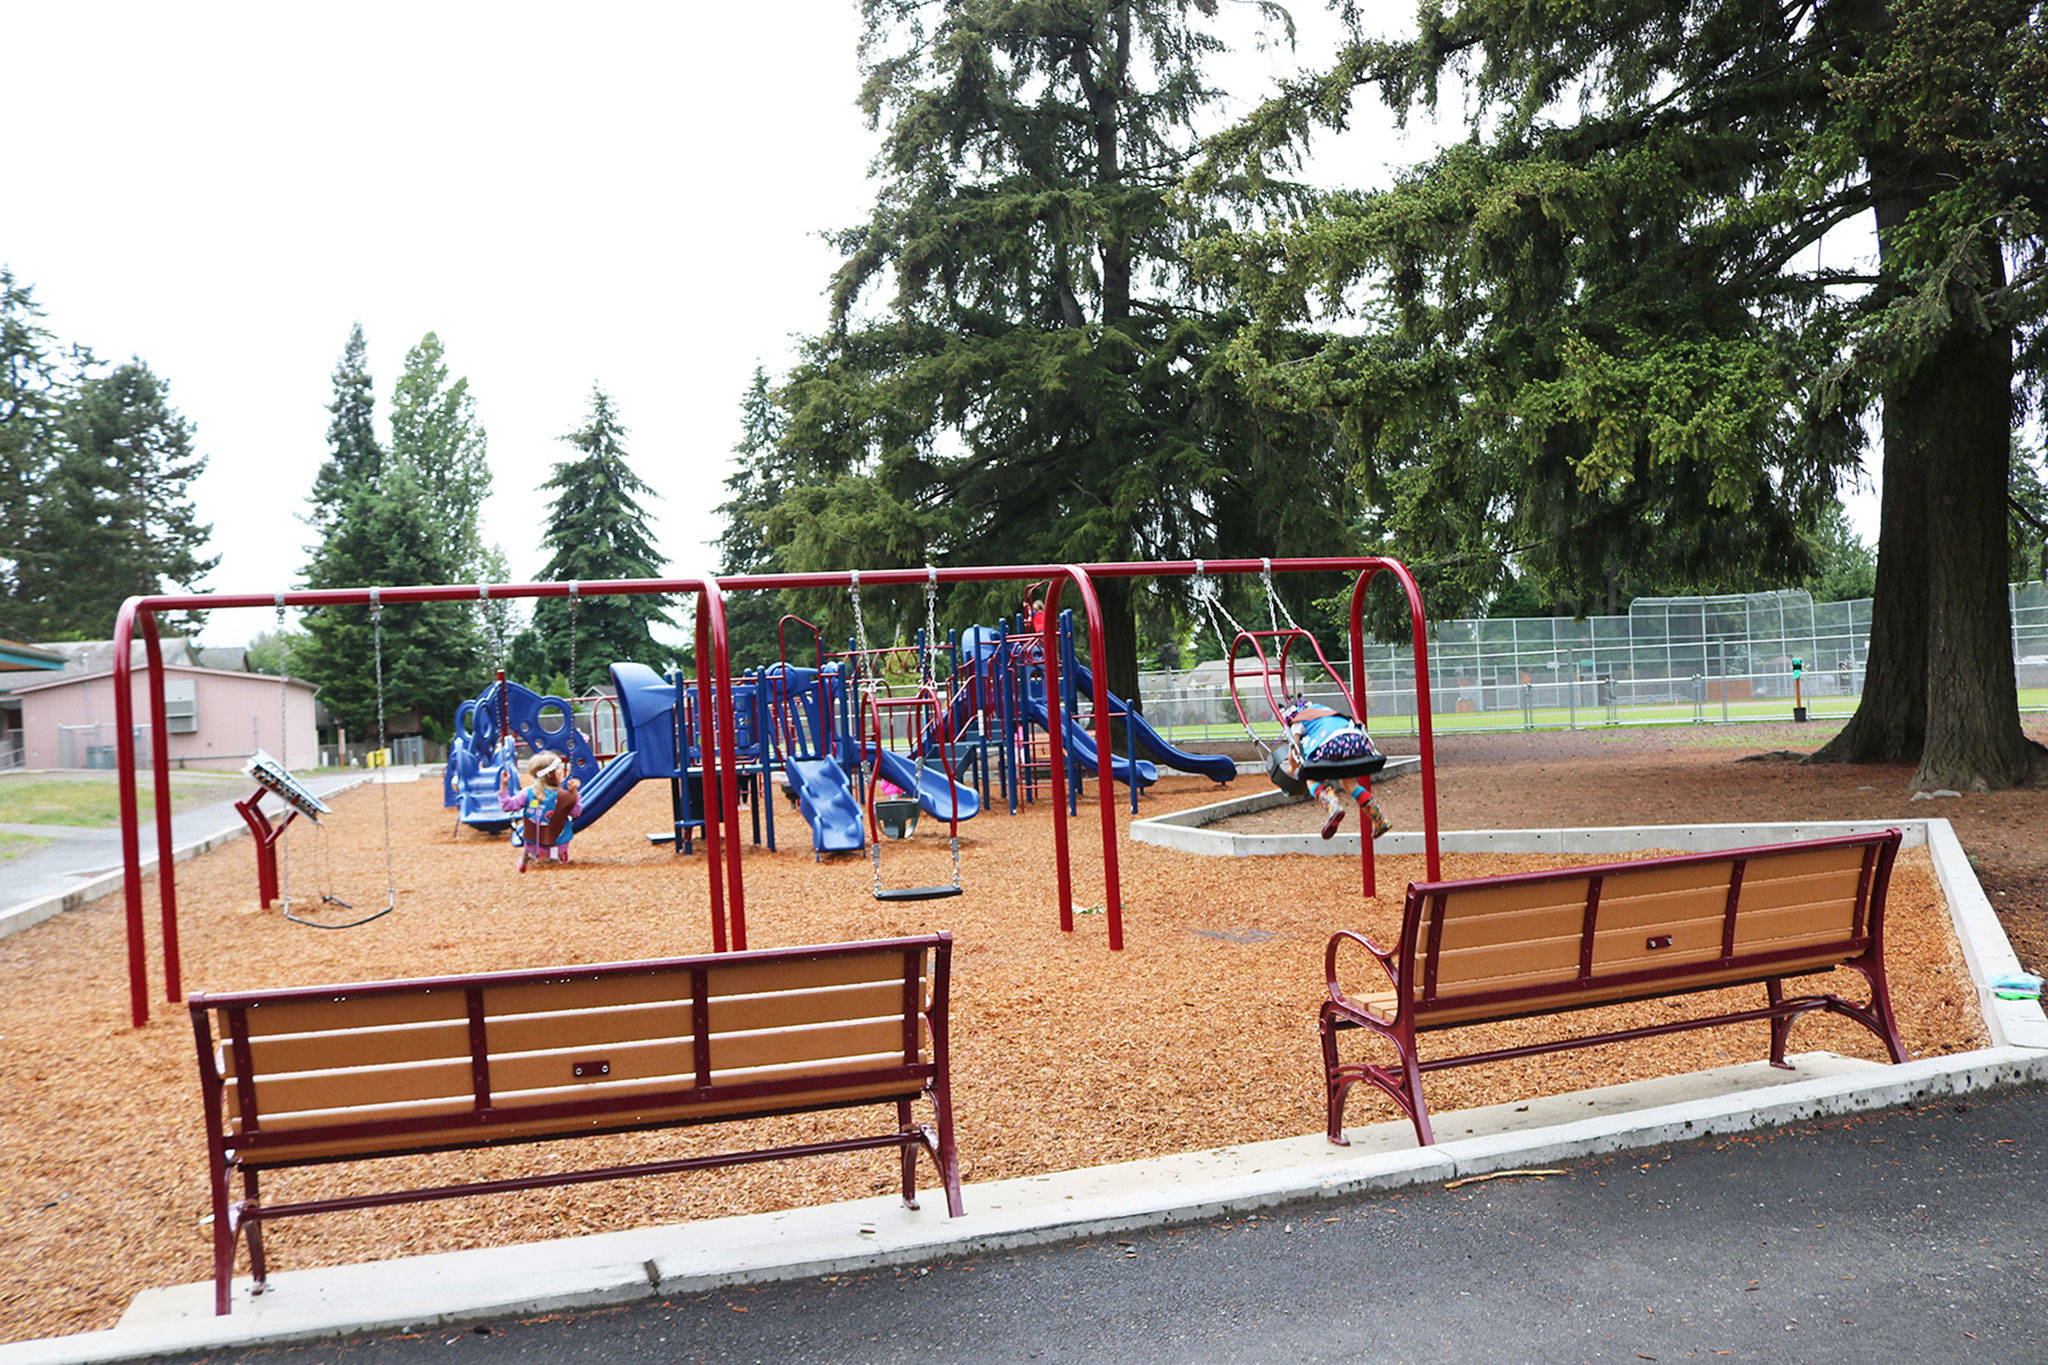 The new playground at the city park also serves the students at Moorlands Elementary. Photo courtesy of the city of Kenmore